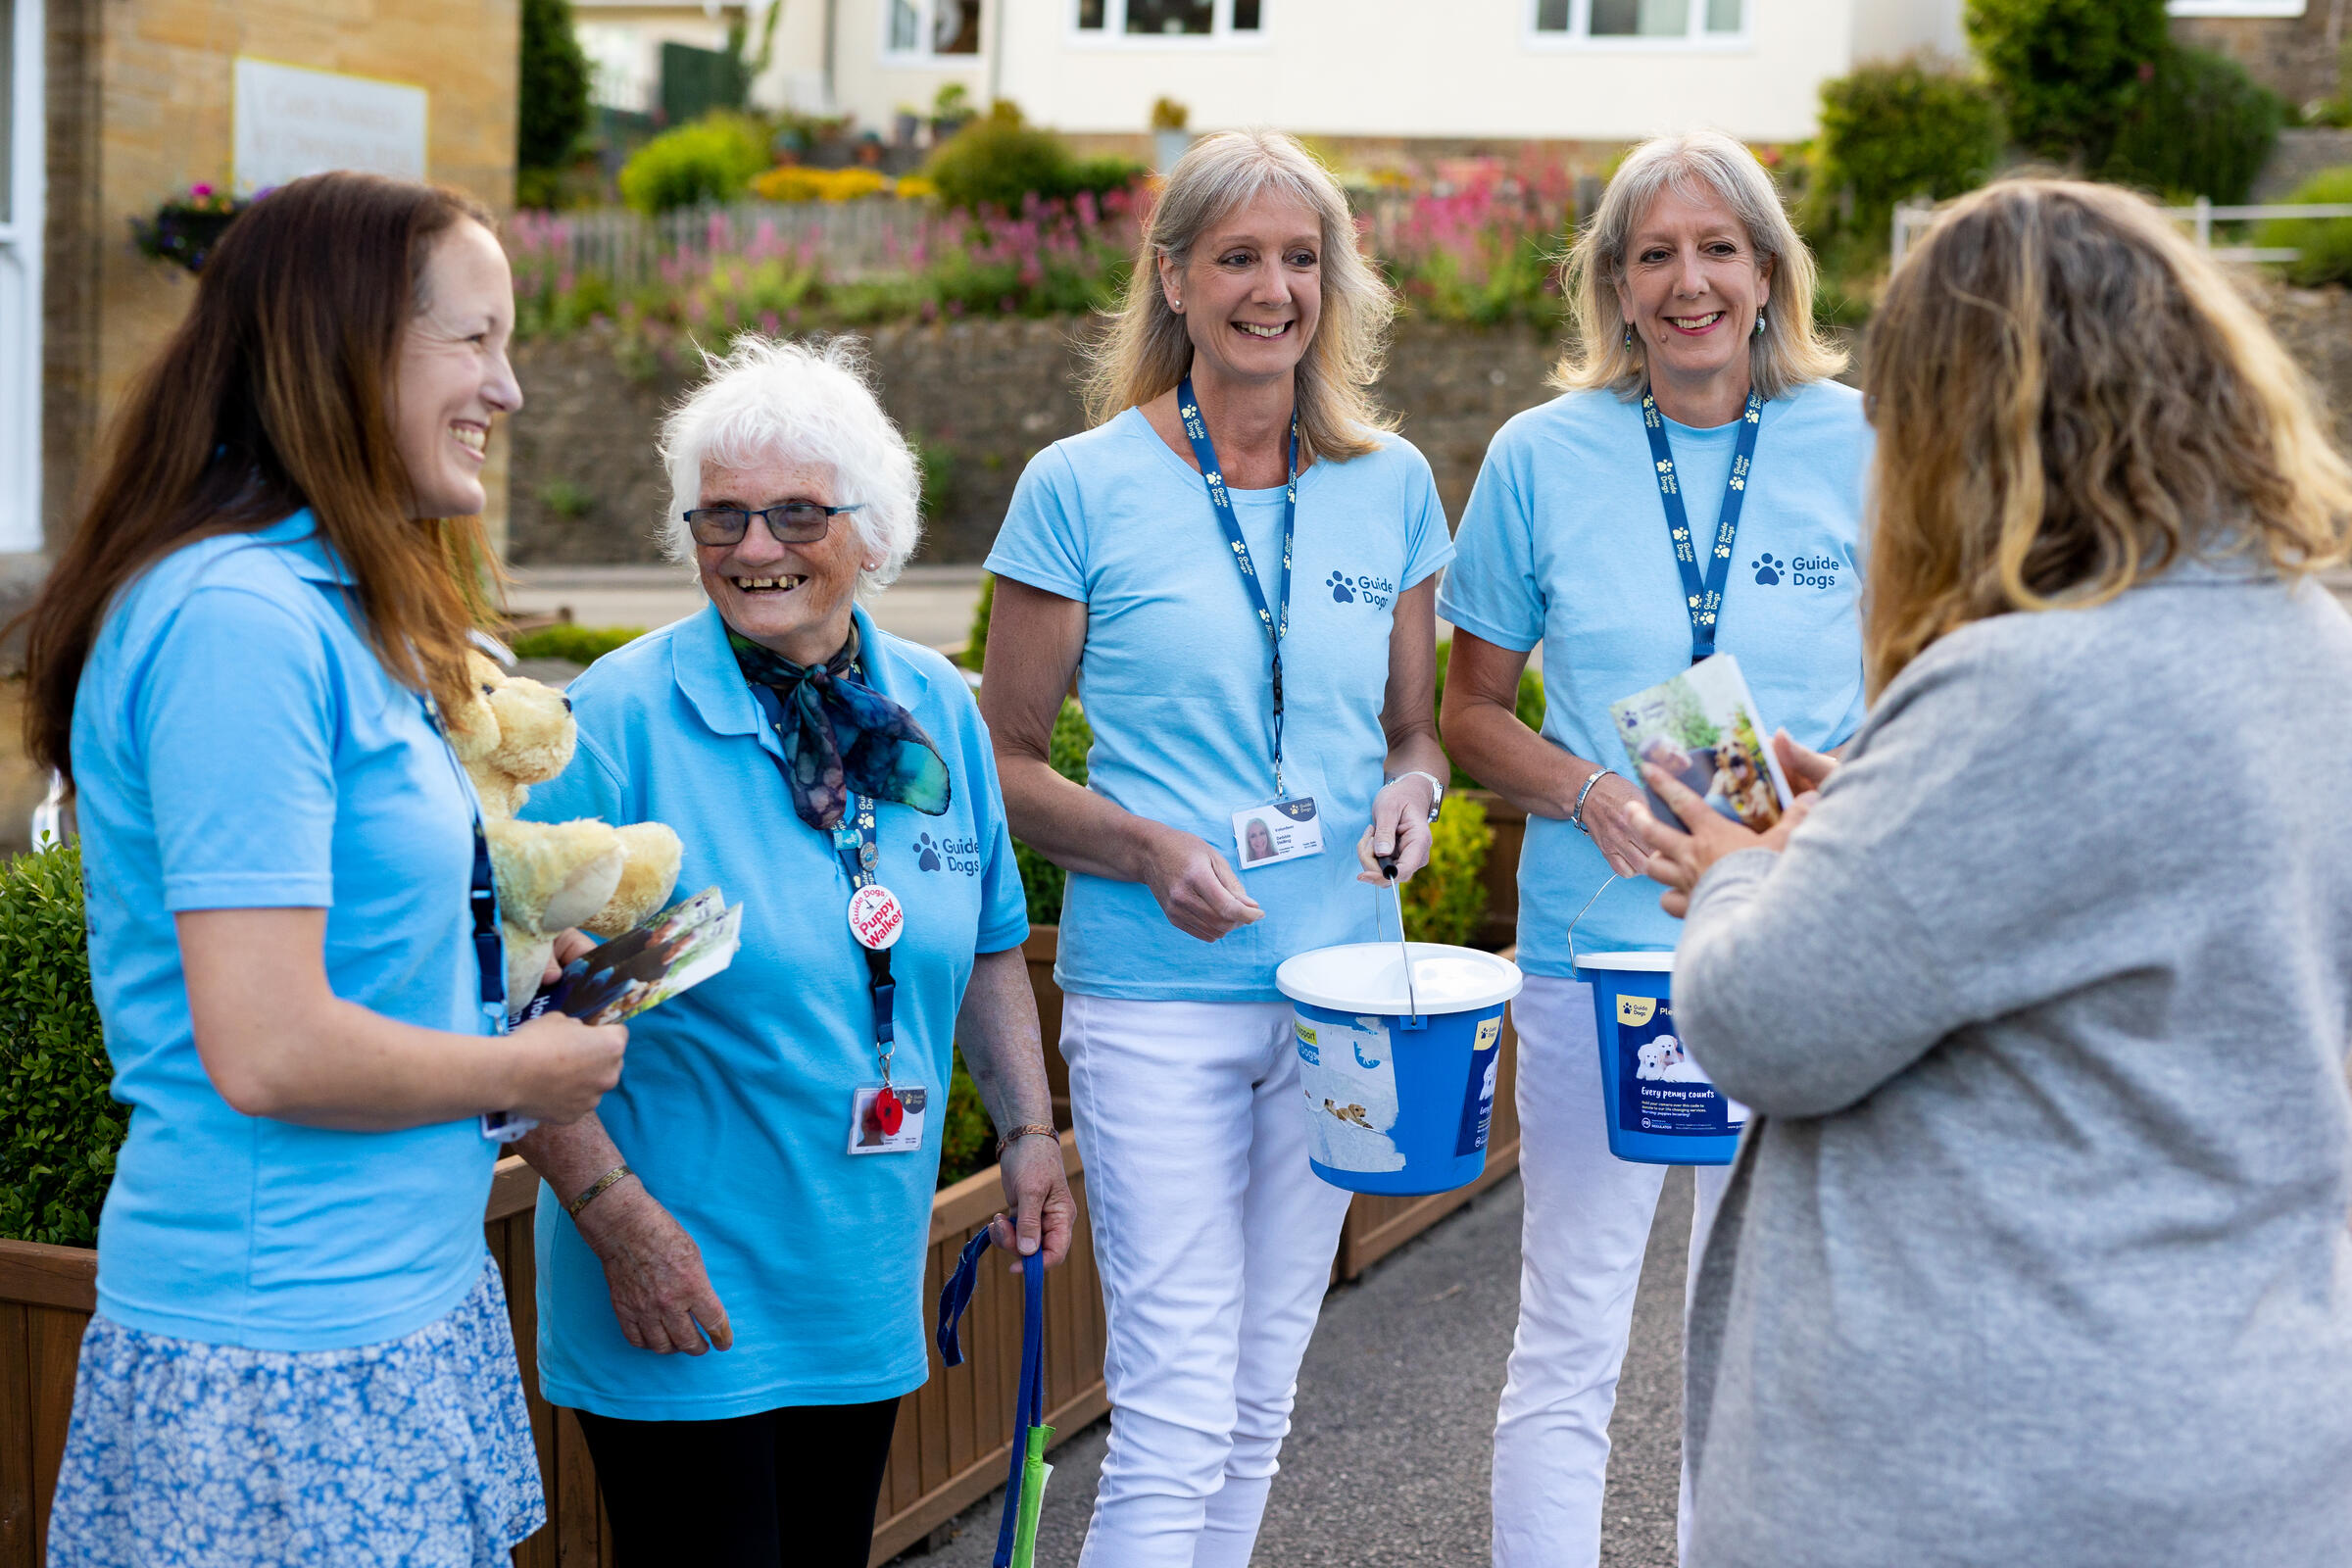 Four women stand in a row. They are smiling and wearing light blue Guide Dogs volunteer t-shirts. Two women hold collection buckets and one holds a guide dog puppy toy. The volunteers are talking to a member of the public.